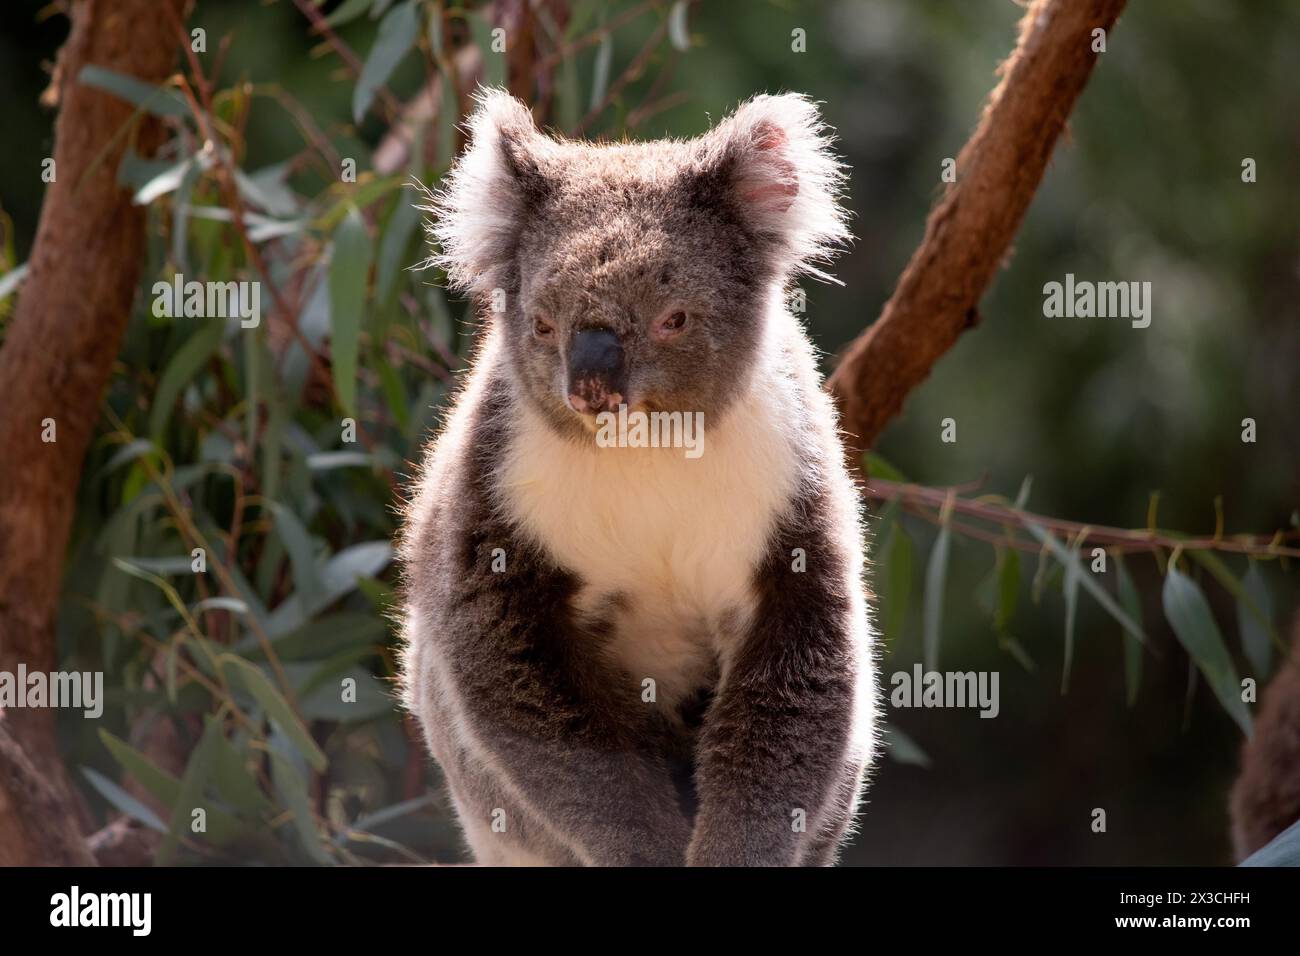 the Koala has a large round head, big furry ears and big black nose. Their fur is usually grey-brown in color with white fur on the chest, inner arms, Stock Photo